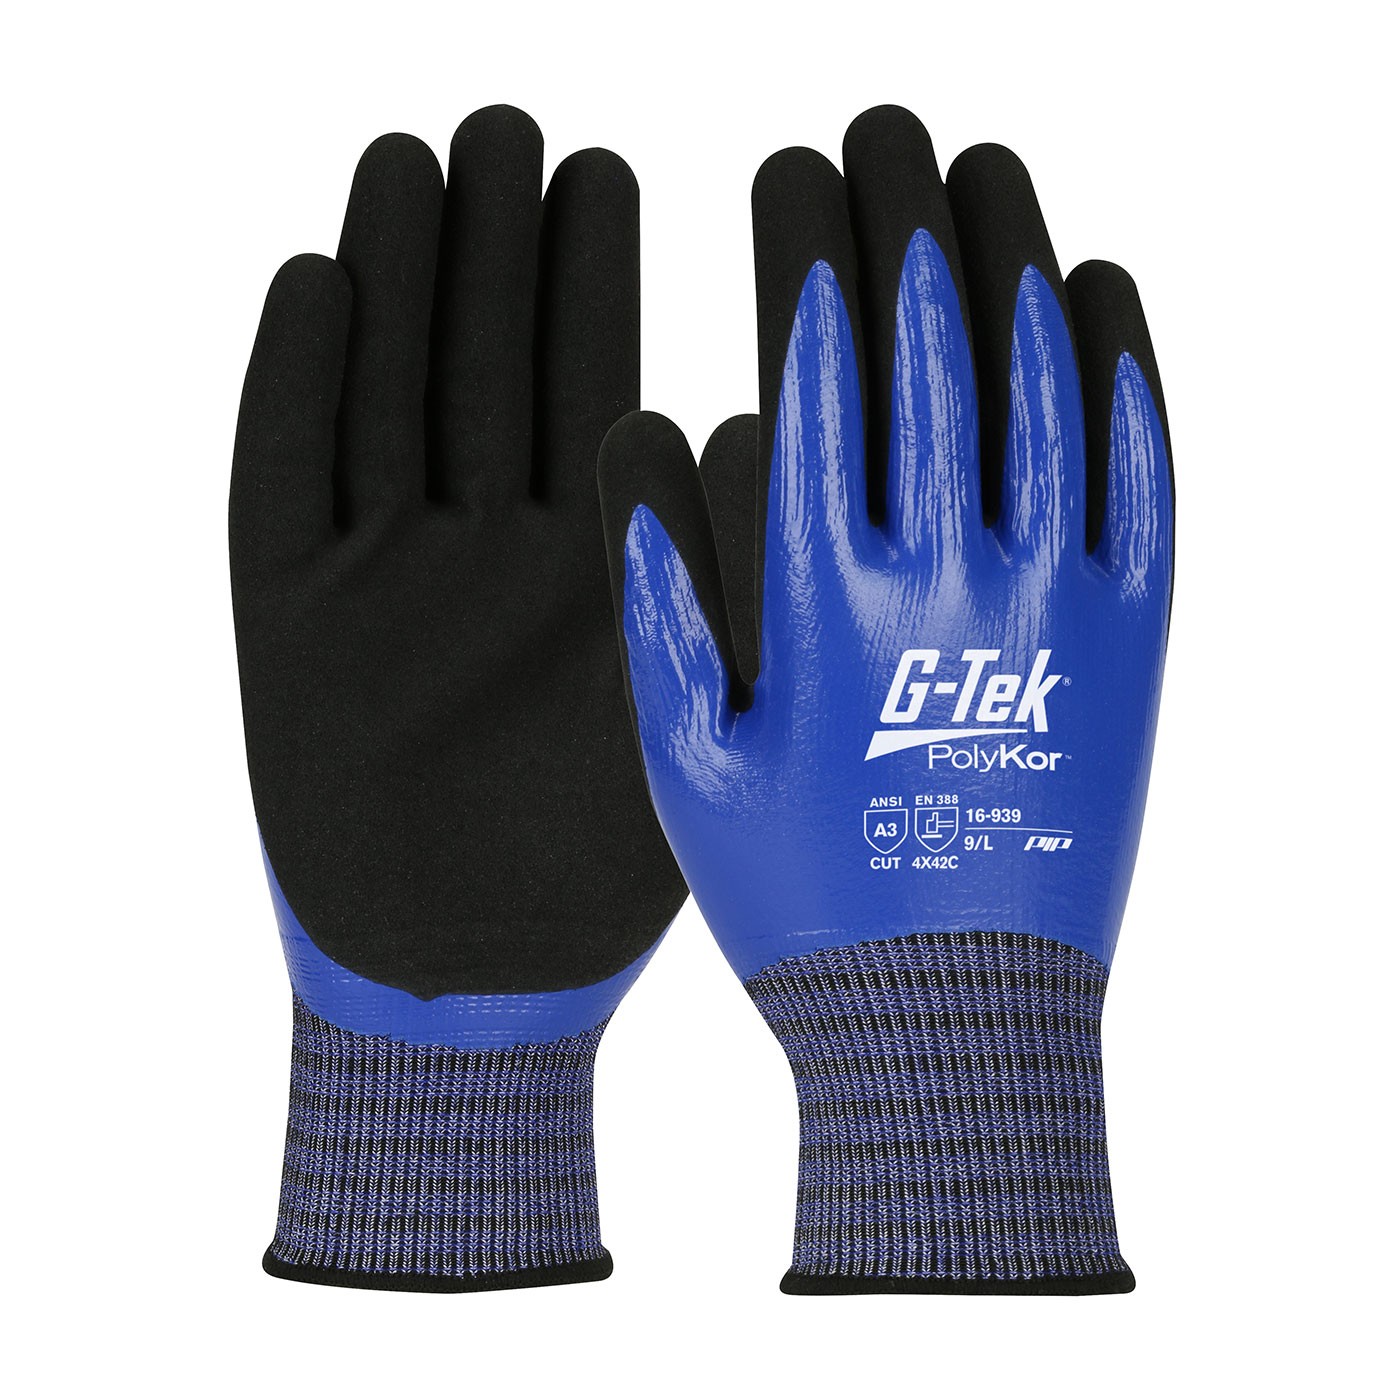 G-Tek® PolyKor® X7™ Seamless Knit PolyKor™ X7™ Blended Glove with Double-Dipped Nitrile Coated MicroSurface Grip on Full Hand - Touchscreen Compatible  (#16-939)